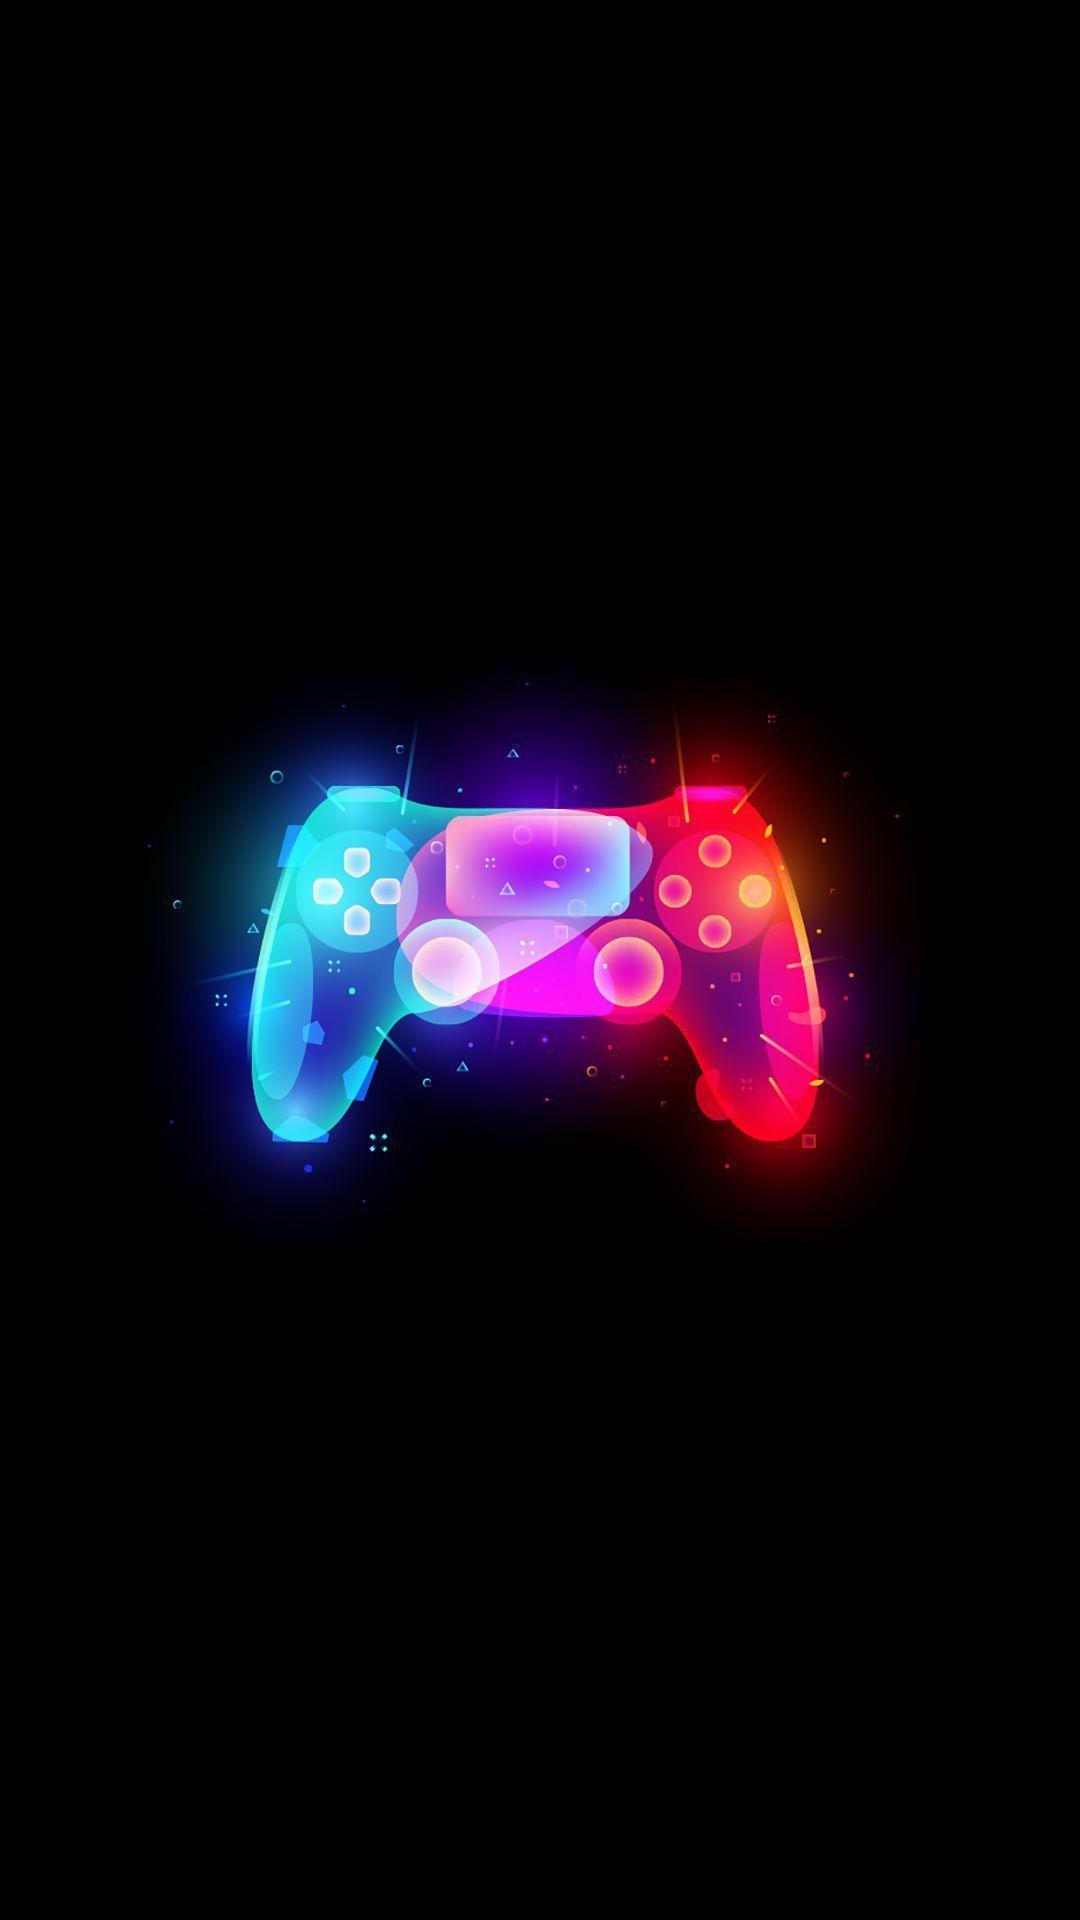 Gaming Wallpapers for iPhone by Mst. Jahanara Sultana